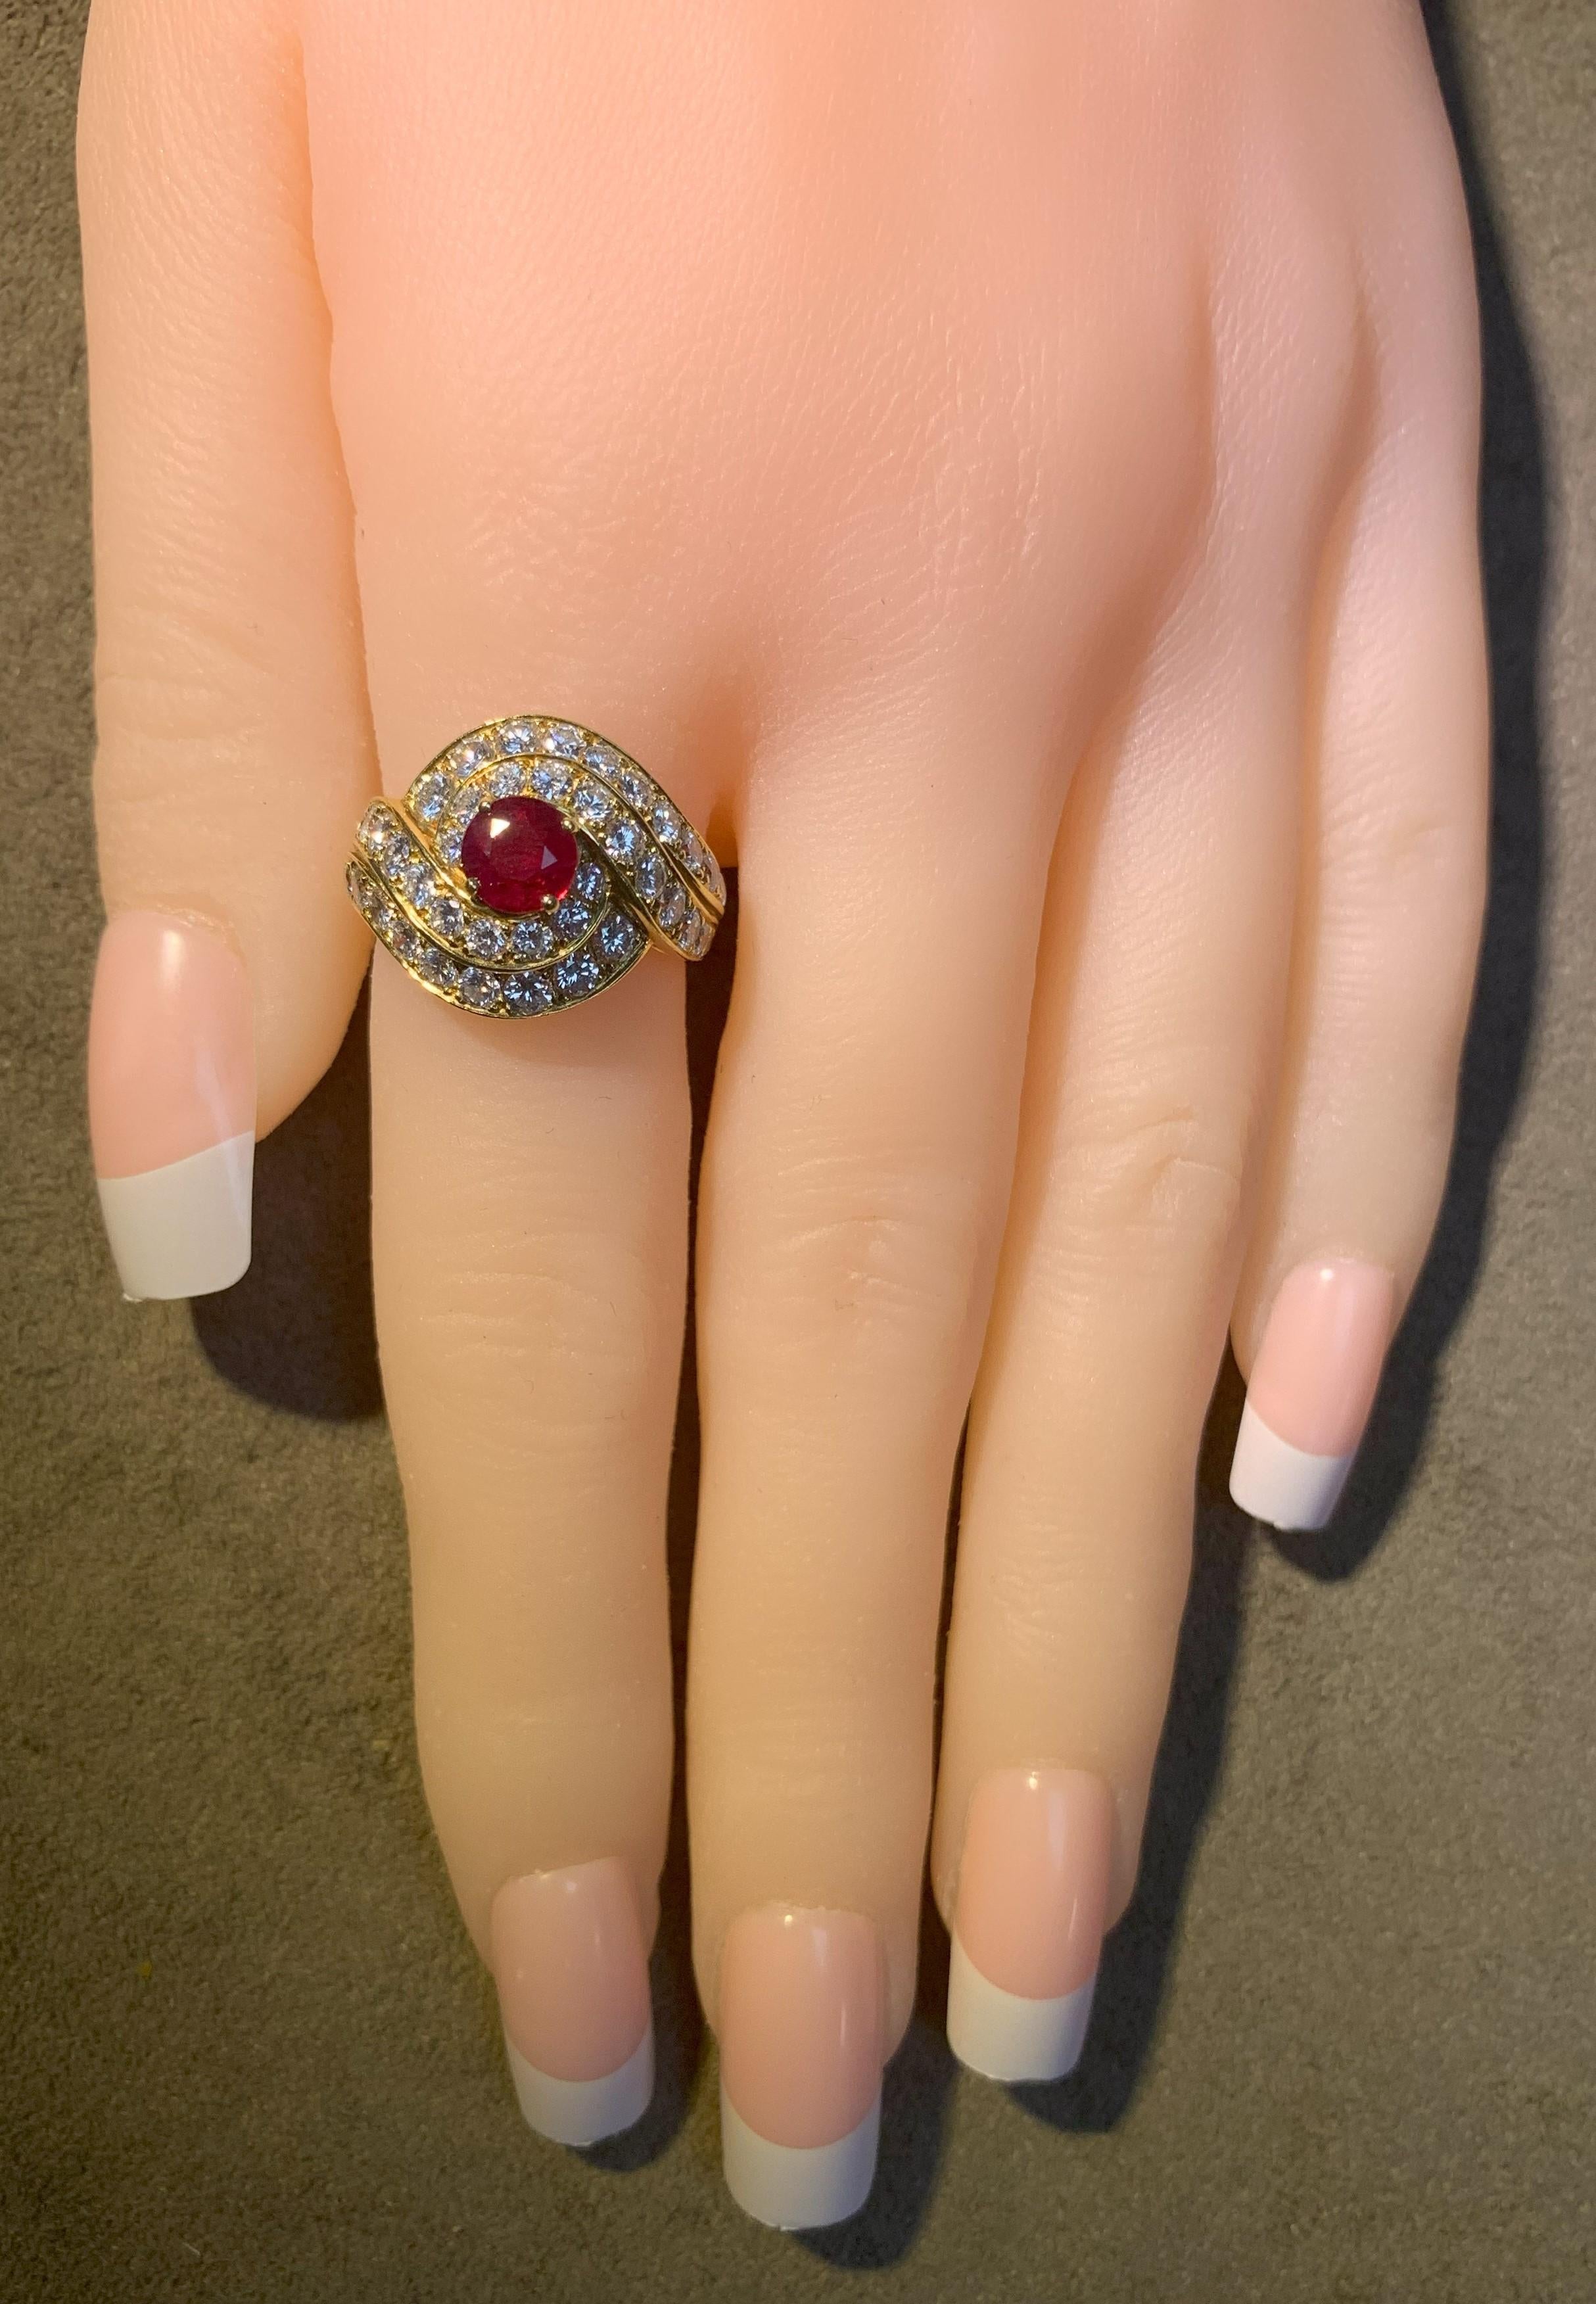 Van Cleef & Arpels 0.95 Ct. Round Center Ruby and 2.10 Ct. Diamond Cocktail Ring For Sale 2